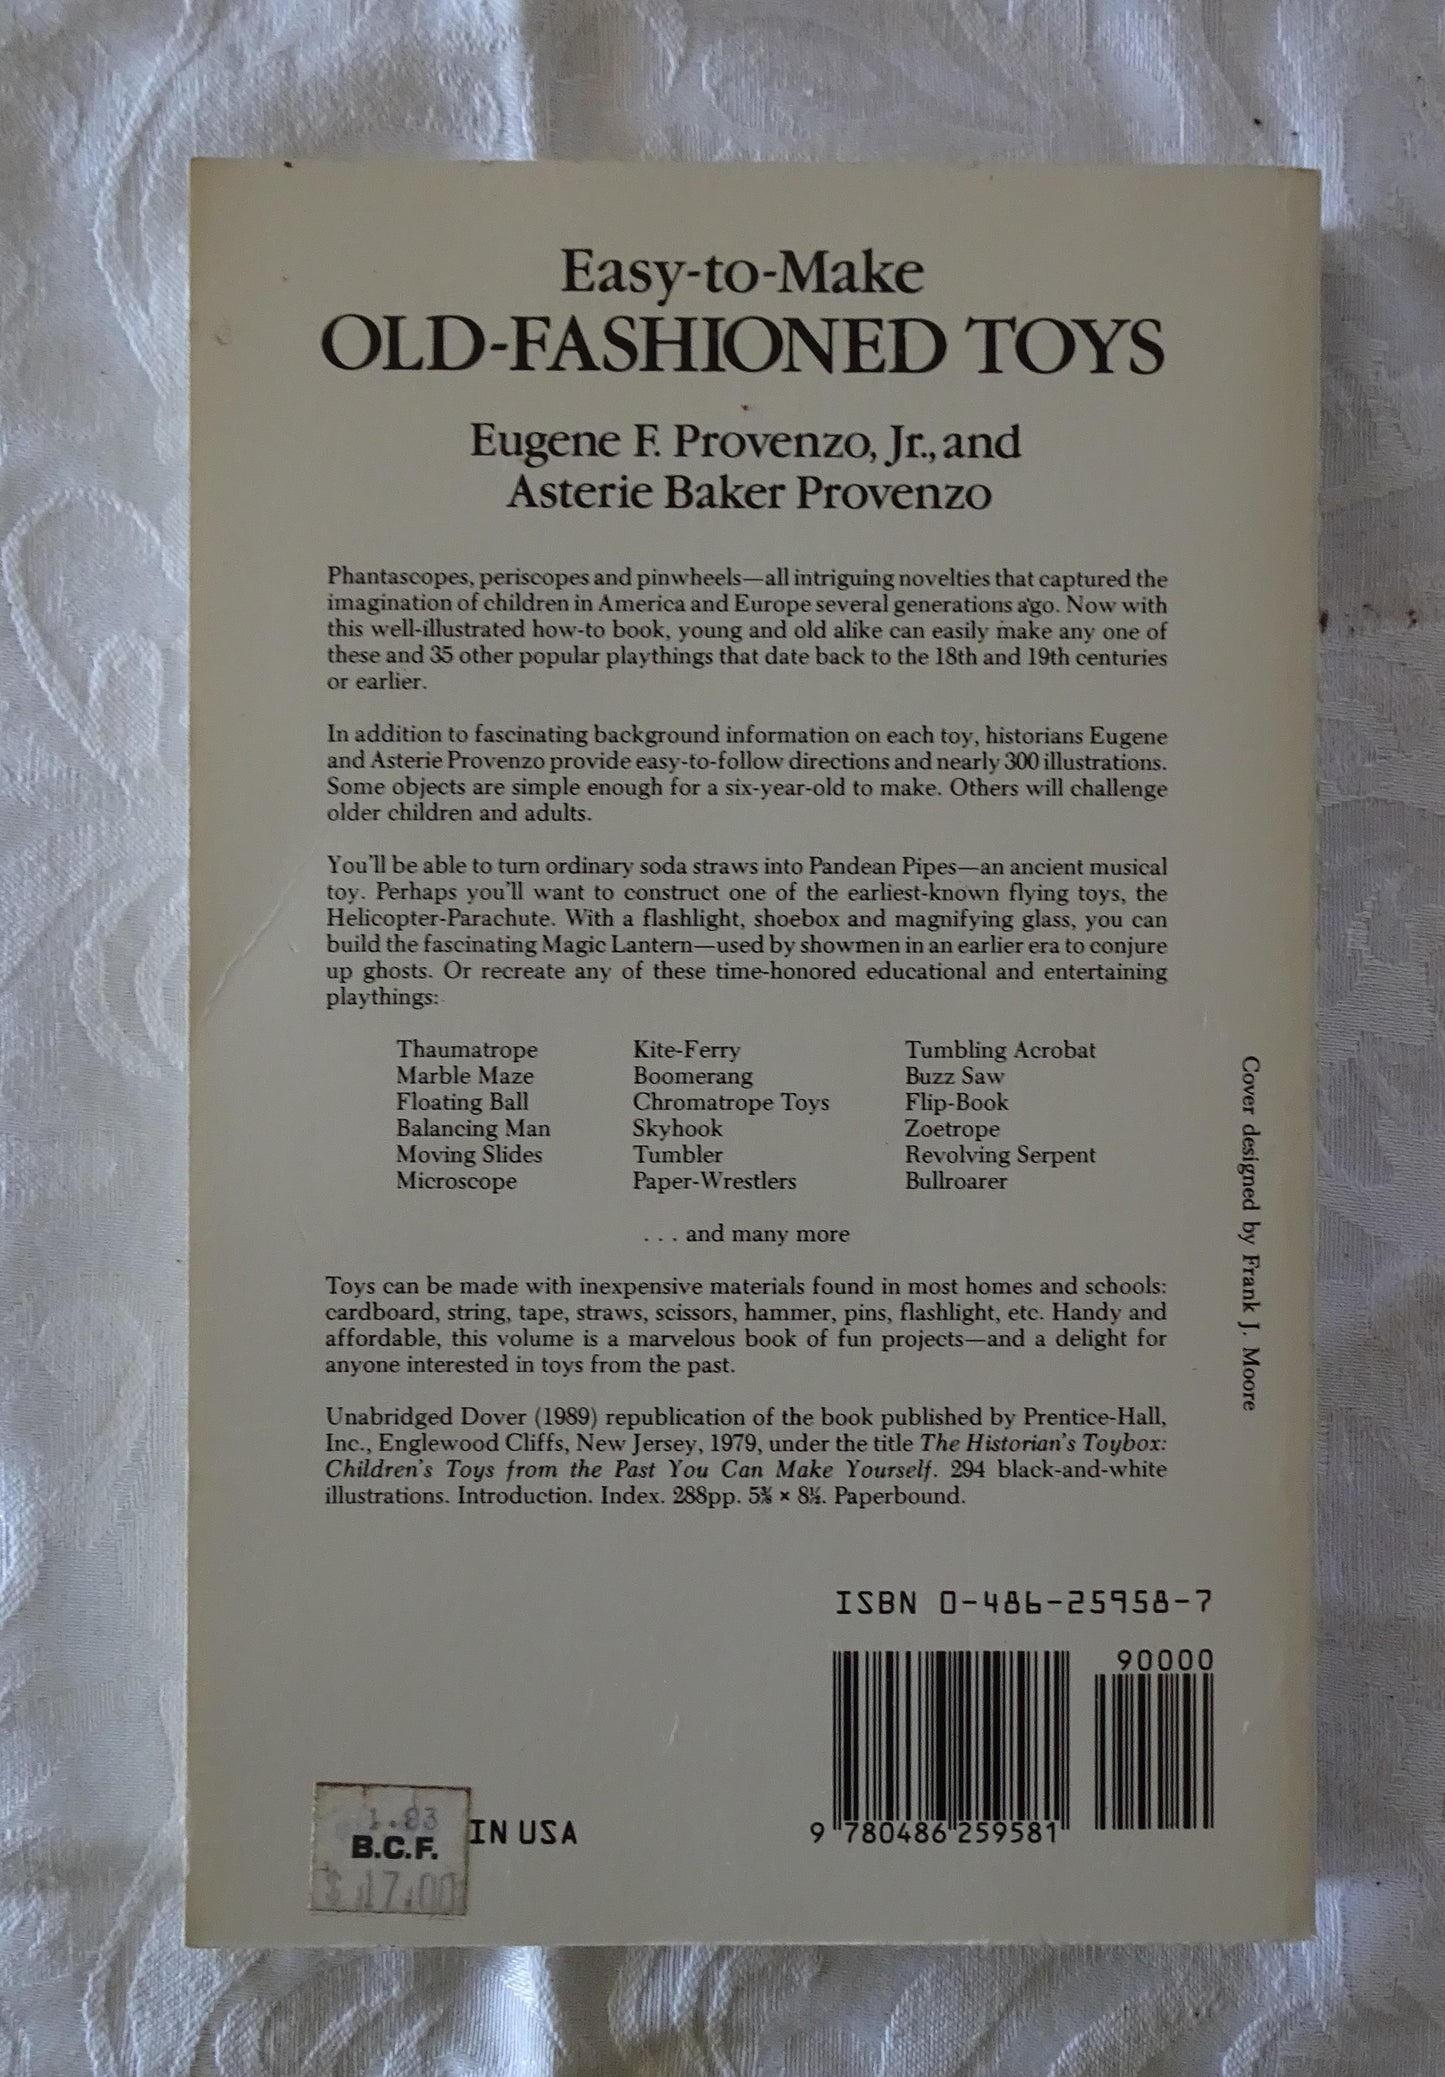 Easy-to-Make Old-Fashioned Toys by Eugene F. Provenzo and Asterie Baker Provenzo